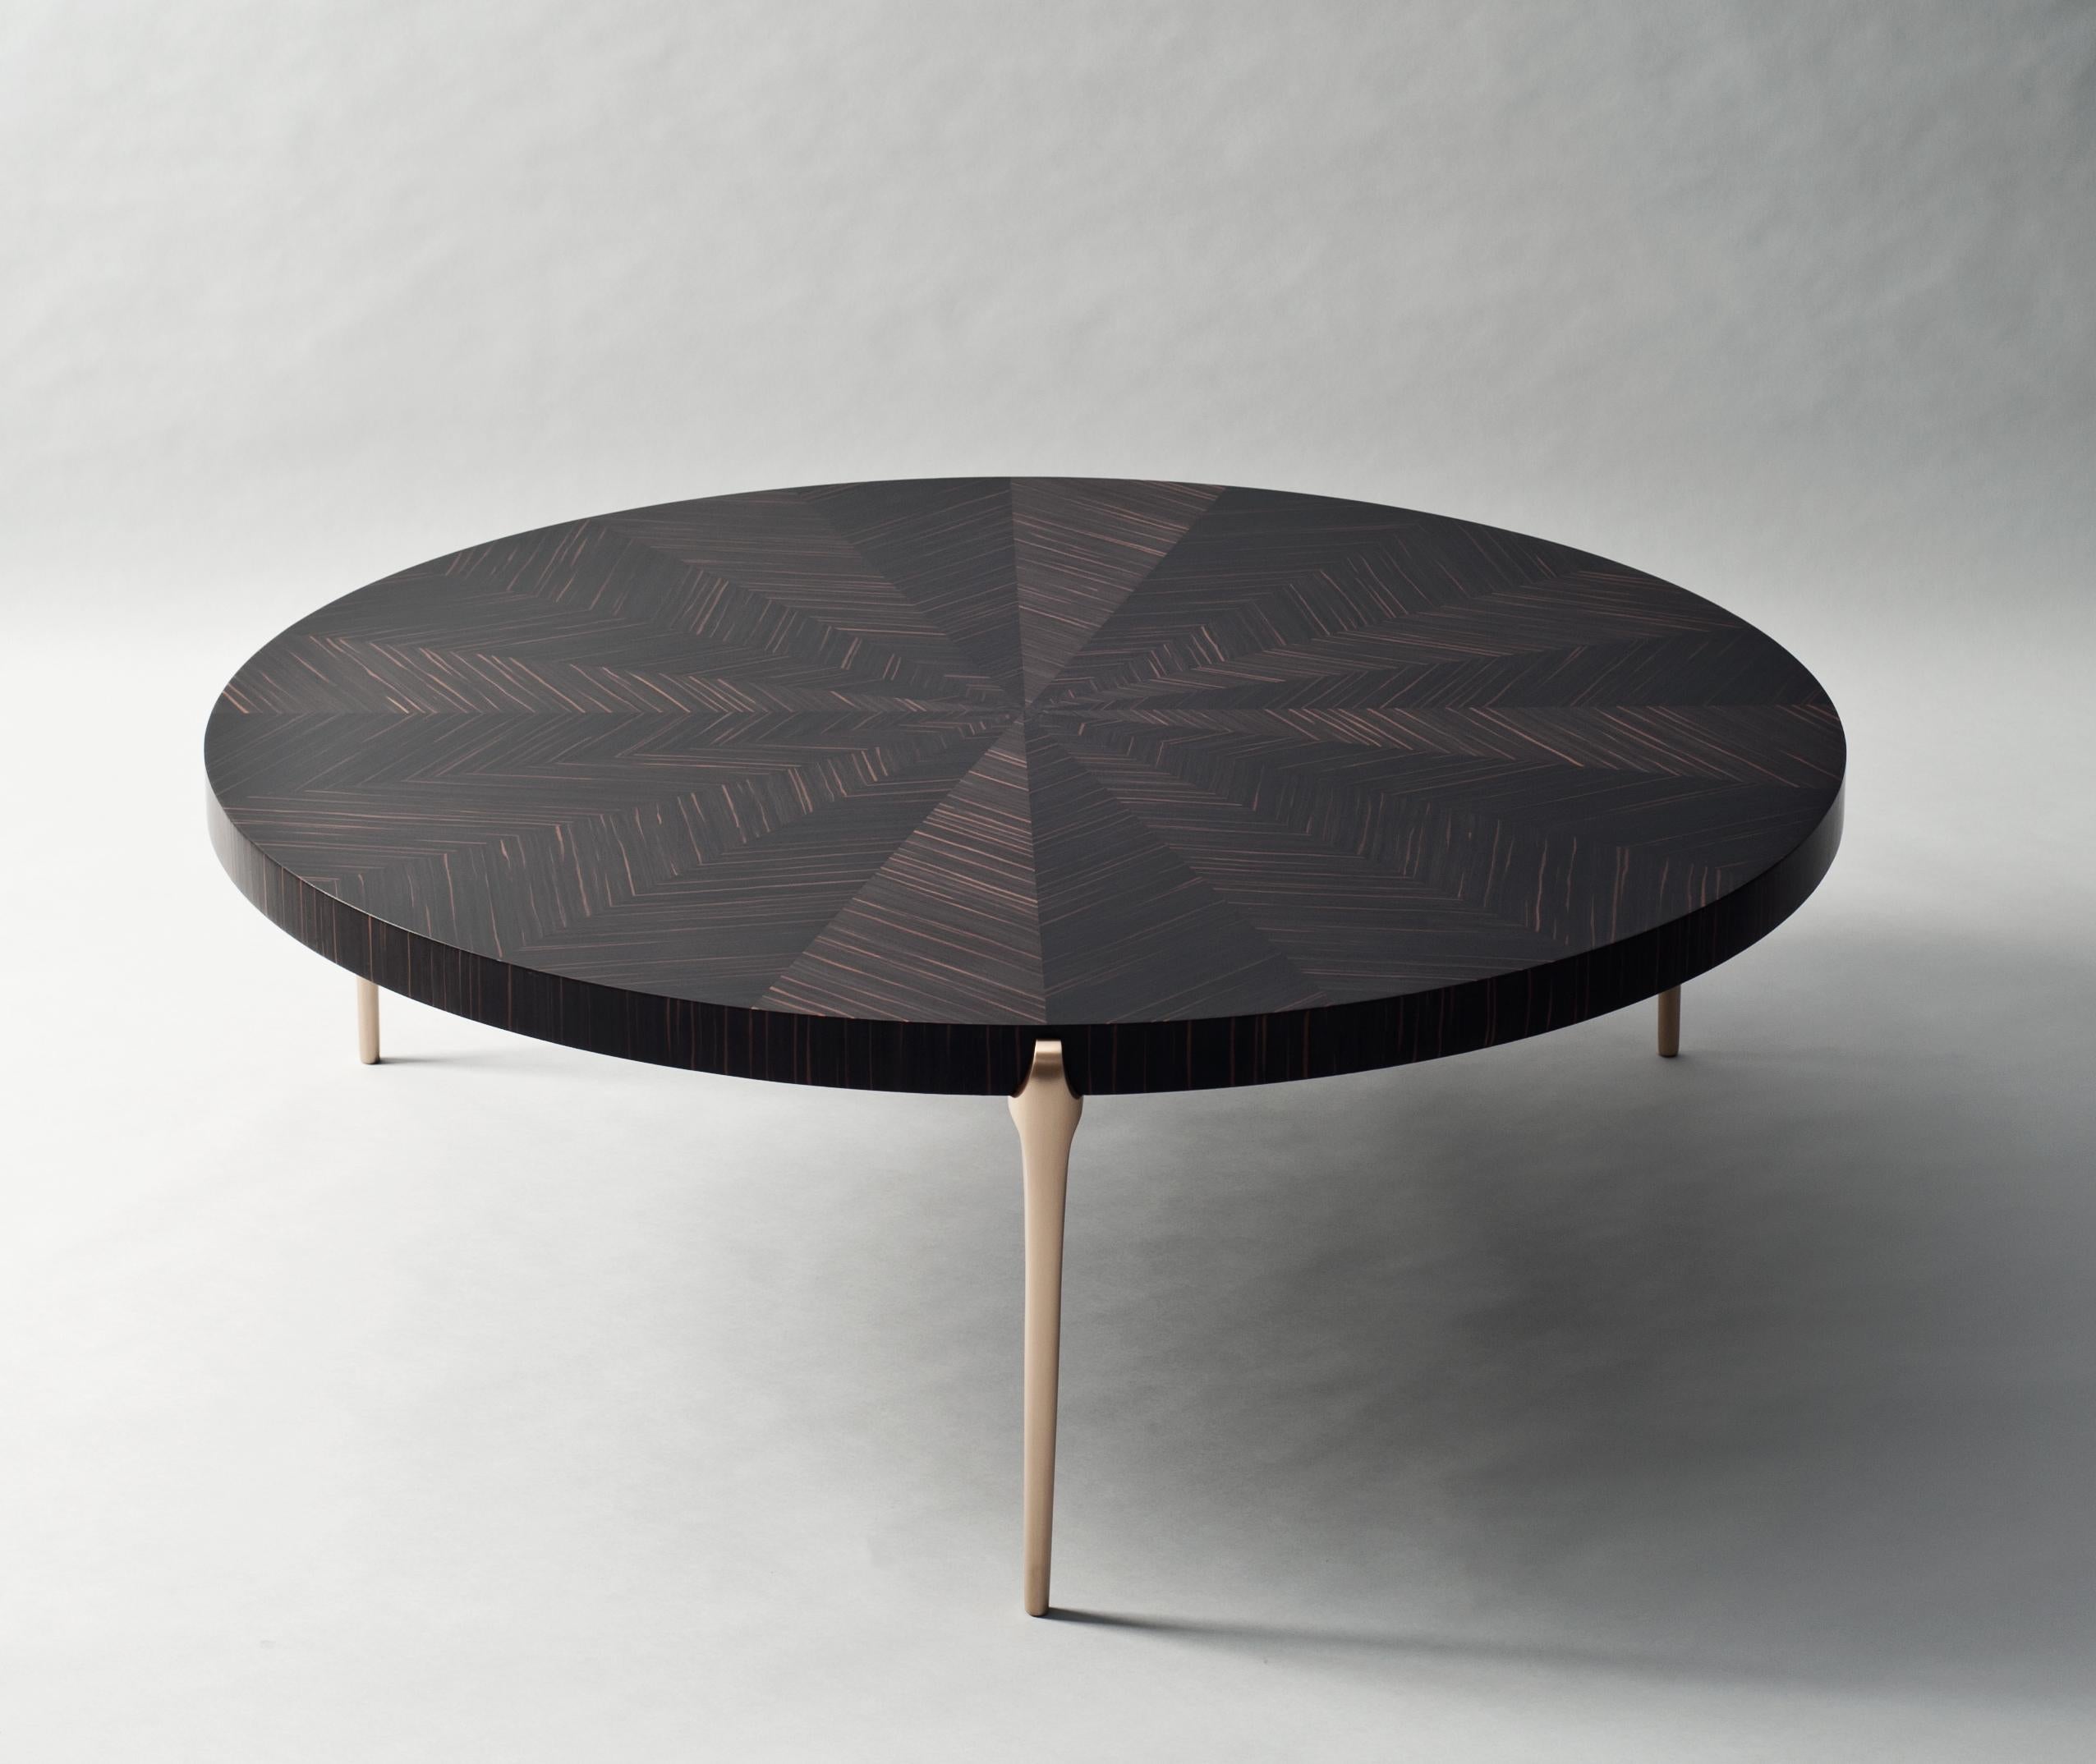 Acantha coffee table by DeMuro Das 
Dimensions: W 120 x D 120 x H 41.1 cm
Materials: Matte Swiss ebony tabletop 
 Solid bronze - Satin legs

Dimensions and finishes can be customized.

DeMuro Das is an international design firm and the aesthetic and